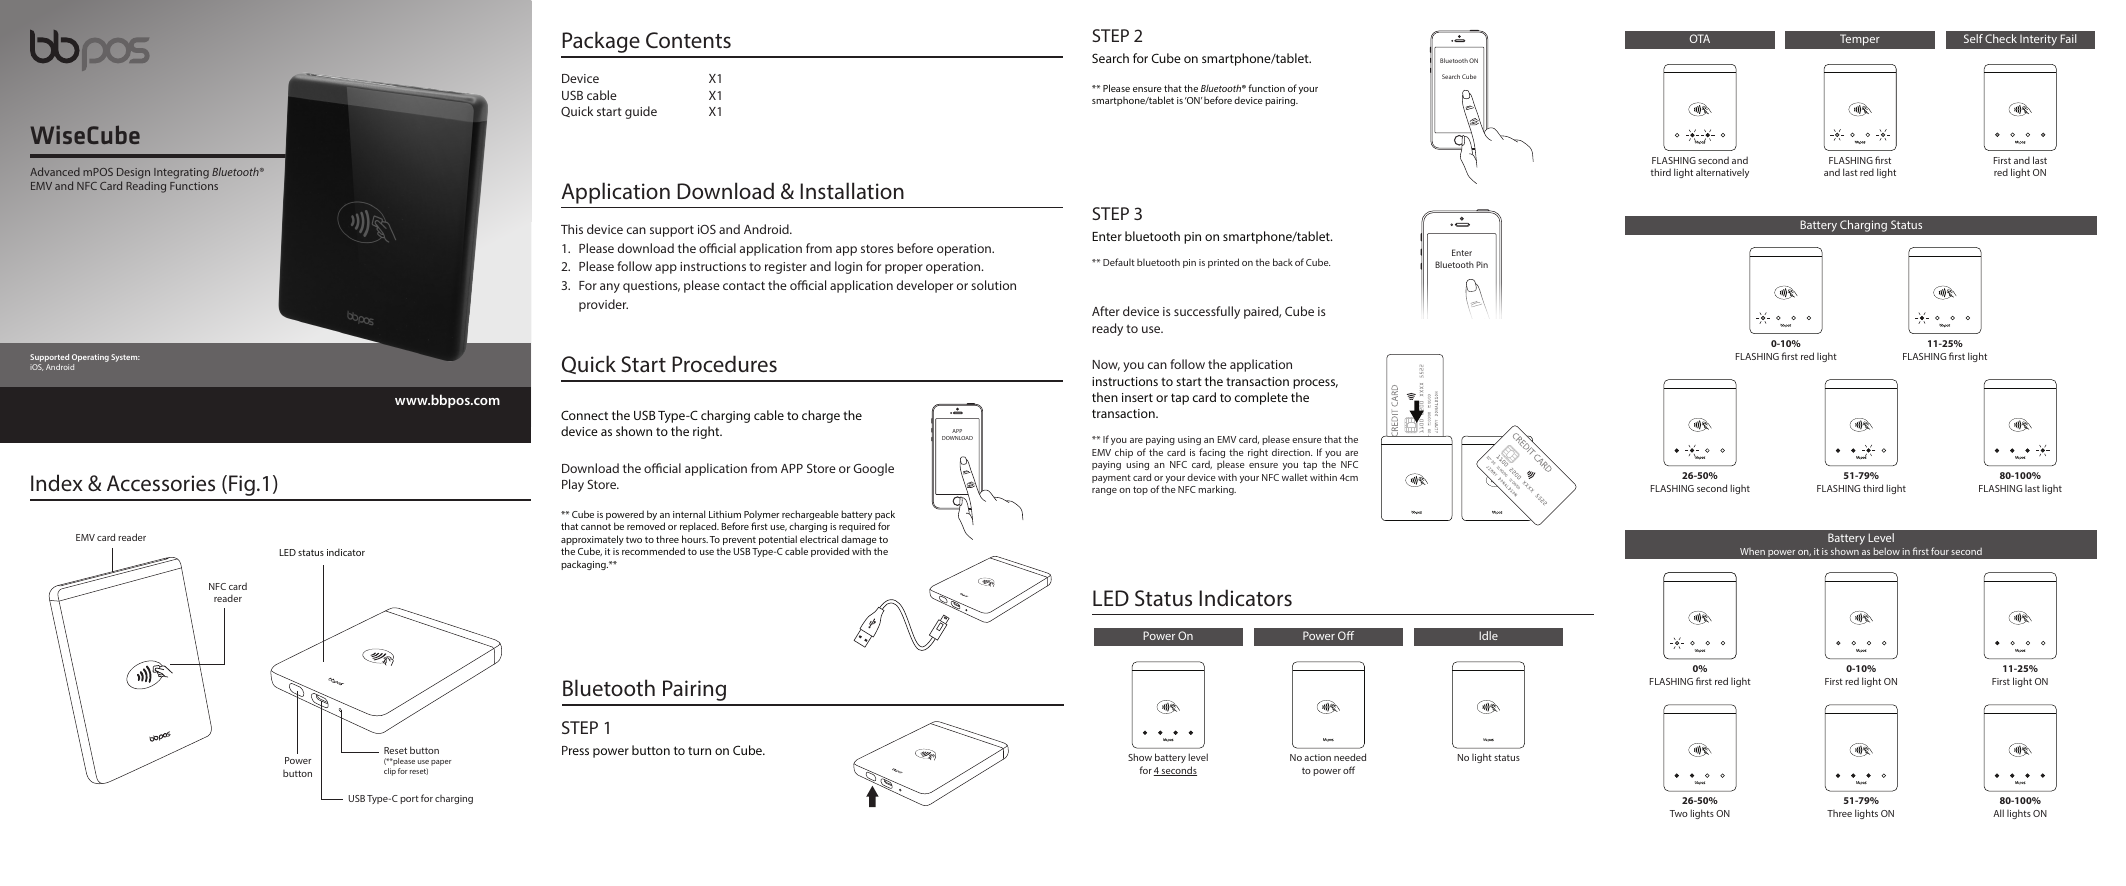 Advanced mPOS Design Integrating Bluetooth®EMV and NFC Card Reading FunctionsWiseCubewww.bbpos.comSupported Operating System:iOS, AndroidPackage ContentsDevice X1USB cable  X1Quick start guide  X1Application Download &amp; InstallationThis device can support iOS and Android.1.  Please download the ocial application from app stores before operation. 2.  Please follow app instructions to register and login for proper operation. 3.  For any questions, please contact the ocial application developer or solution  provider.Index &amp; Accessories (Fig.1) LED status indicator Quick Start ProceduresConnect the USB Type-C charging cable to charge the device as shown to the right.Download the ocial application from APP Store or Google Play Store.** Cube is powered by an internal Lithium Polymer rechargeable battery pack that cannot be removed or replaced. Before rst use, charging is required for approximately two to three hours. To prevent potential electrical damage to the Cube, it is recommended to use the USB Type-C cable provided with the packaging.**APPDOWNLOADEnterBluetooth PinSTEP 3Enter bluetooth pin on smartphone/tablet.** Default bluetooth pin is printed on the back of Cube.After device is successfully paired, Cube is ready to use.Now, you can follow the application instructions to start the transaction process, then insert or tap card to complete the transaction.** If you are paying using an EMV card, please ensure that the EMV chip of the card is facing the right direction. If you are paying using an NFC card, please ensure you tap the NFC payment card or your device with your NFC wallet within 4cm range on top of the NFC marking.Bluetooth ONSearch CubeSTEP 2Search for Cube on smartphone/tablet.** Please ensure that the Bluetooth® function of your smartphone/tablet is ‘ON’ before device pairing.EMV card readerReset button(**please use paperclip for reset) USB Type-C port for chargingPowerbuttonNFC cardreader LED Status Indicators STEP 1Press power button to turn on Cube.Bluetooth PairingPower OnShow battery level for 4 secondsPower ONo action needed to power oIdleNo light statusBattery Charging Status26-50%FLASHING second light51-79%FLASHING third light80-100%FLASHING last light0-10%FLASHING rst red light11-25%FLASHING rst lightBattery LevelWhen power on, it is shown as below in rst four second0%FLASHING rst red light26-50%Two lights ON0-10%First red light ON51-79%Three lights ON11-25%First light ON80-100%All lights ONOTA Self Check Interity FailFLASHING second and third light alternativelyTemperFLASHING rst and last red lightFirst and last red light ON